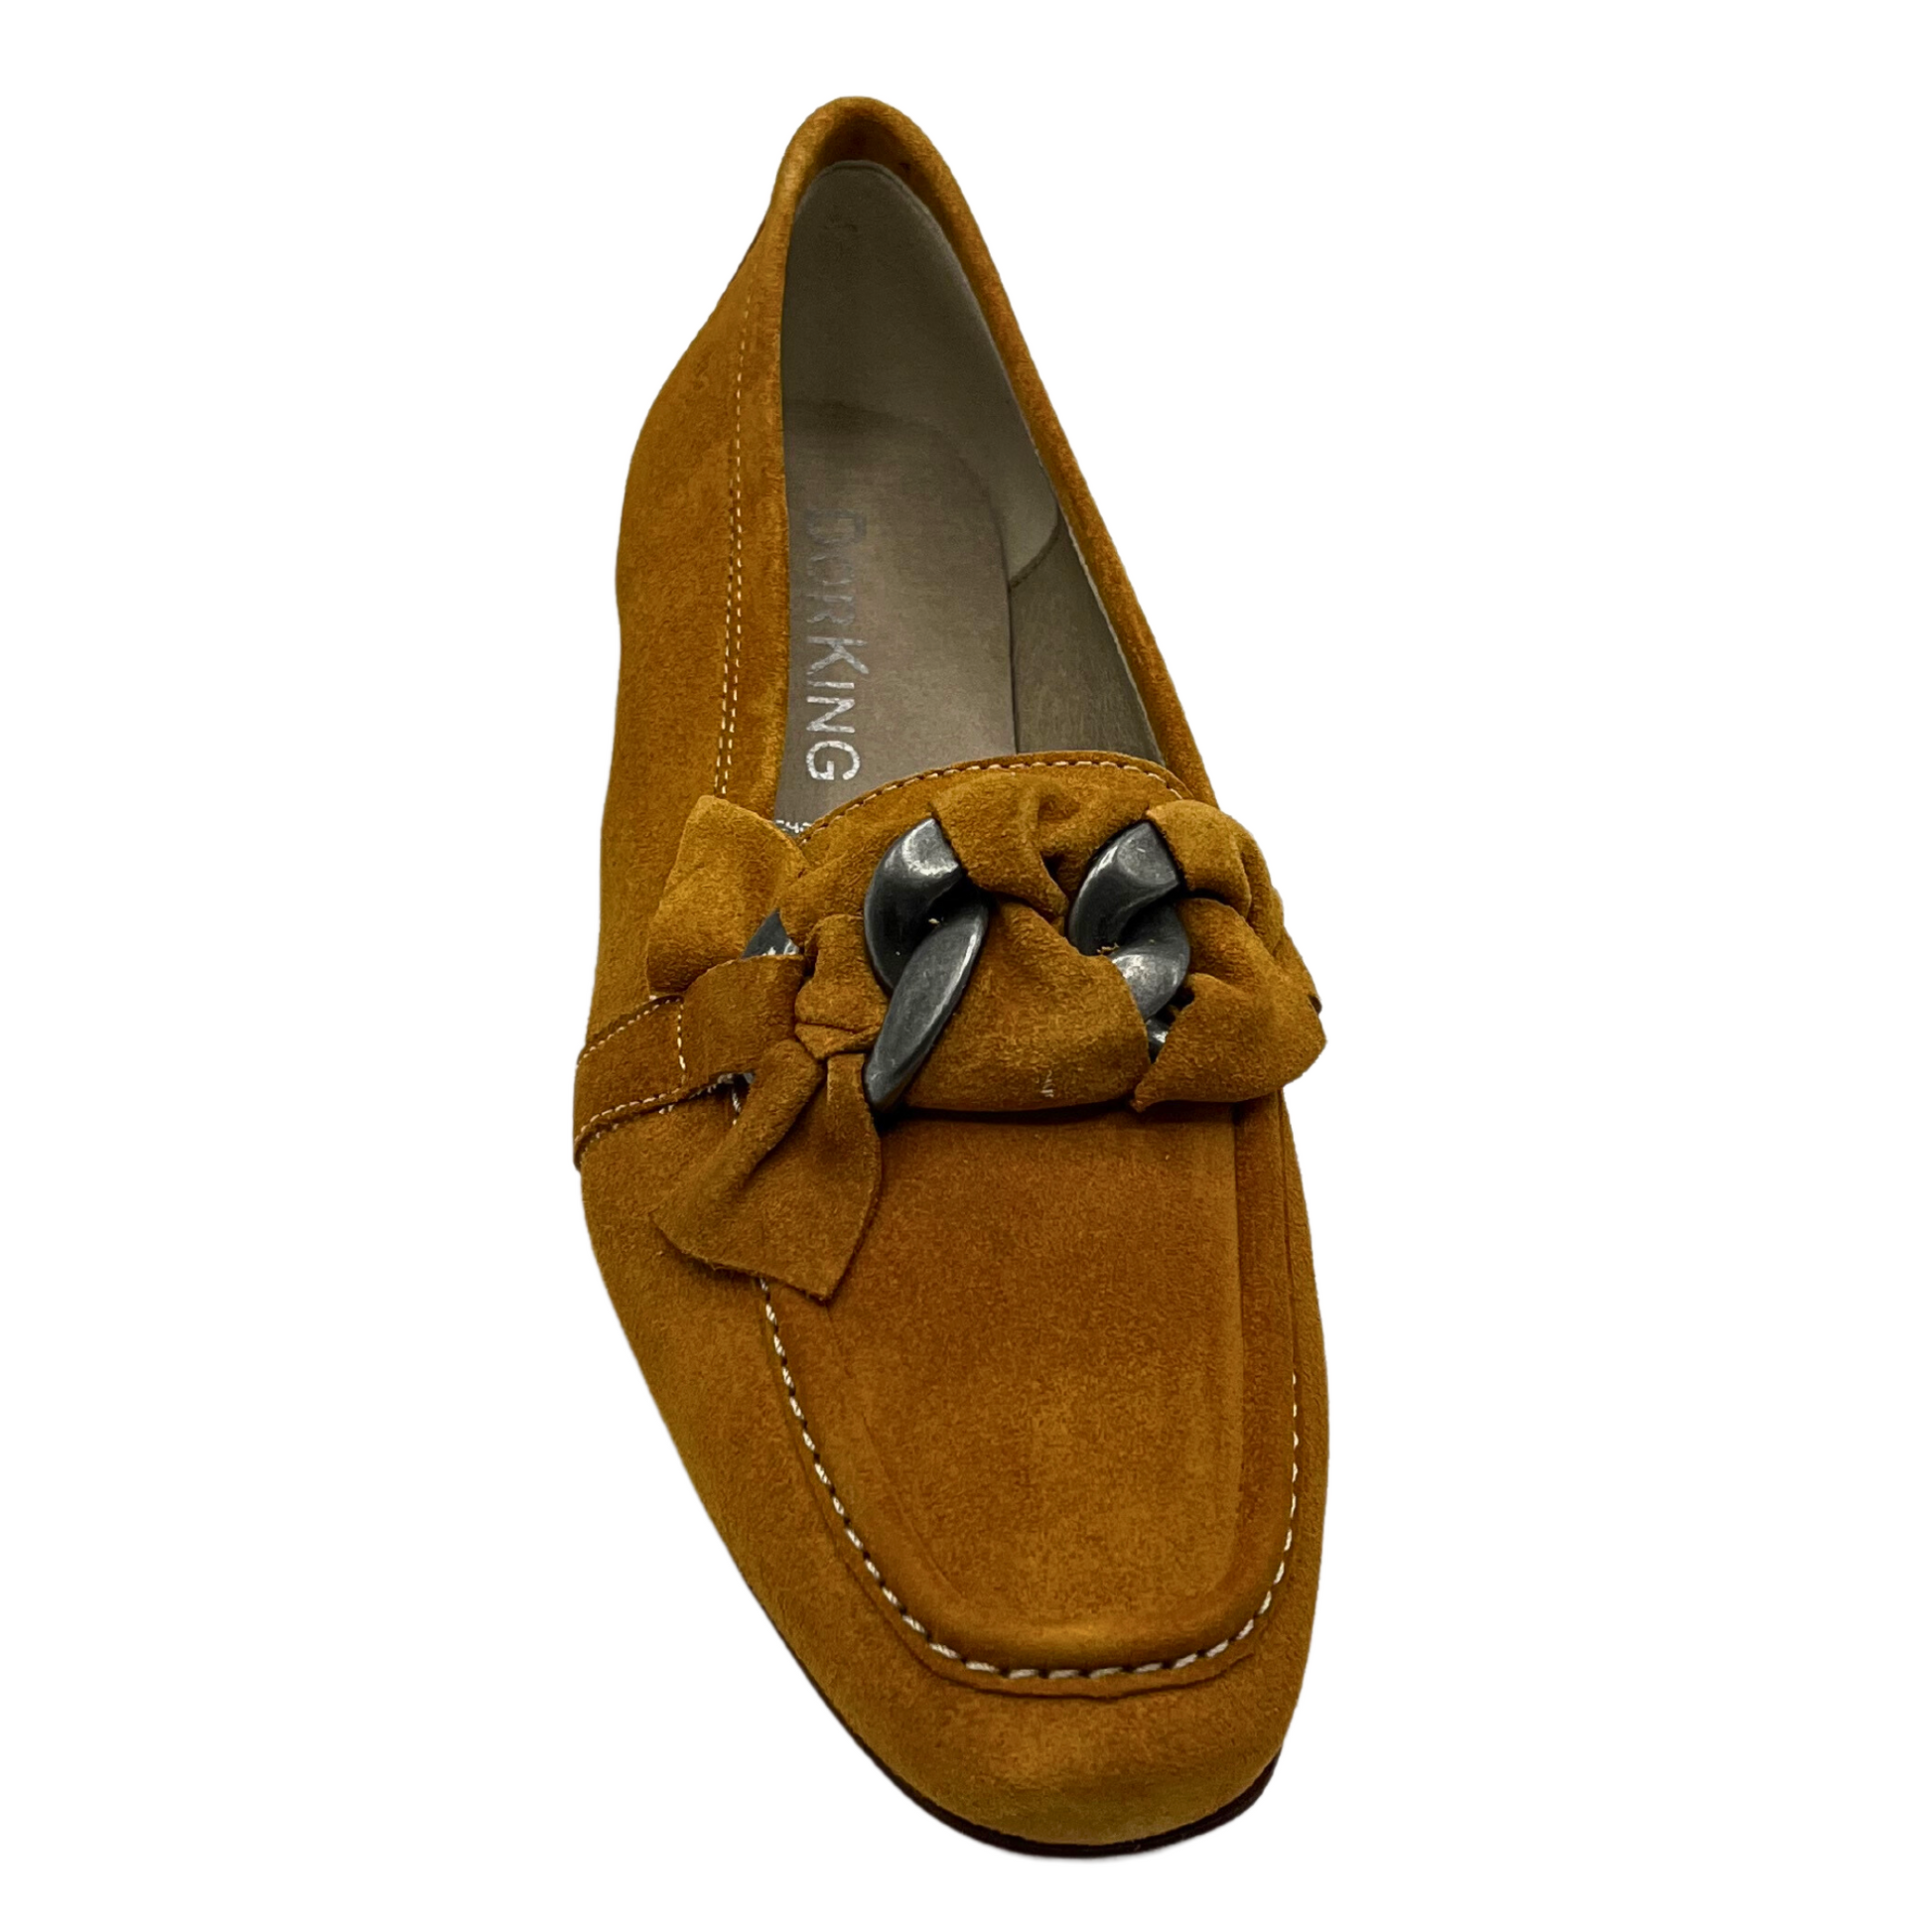 Top down view of a moccasin style slip on loafer.  Mustard suede with white stitching.  Across the top of foot is a knotted leather around a metallic chain